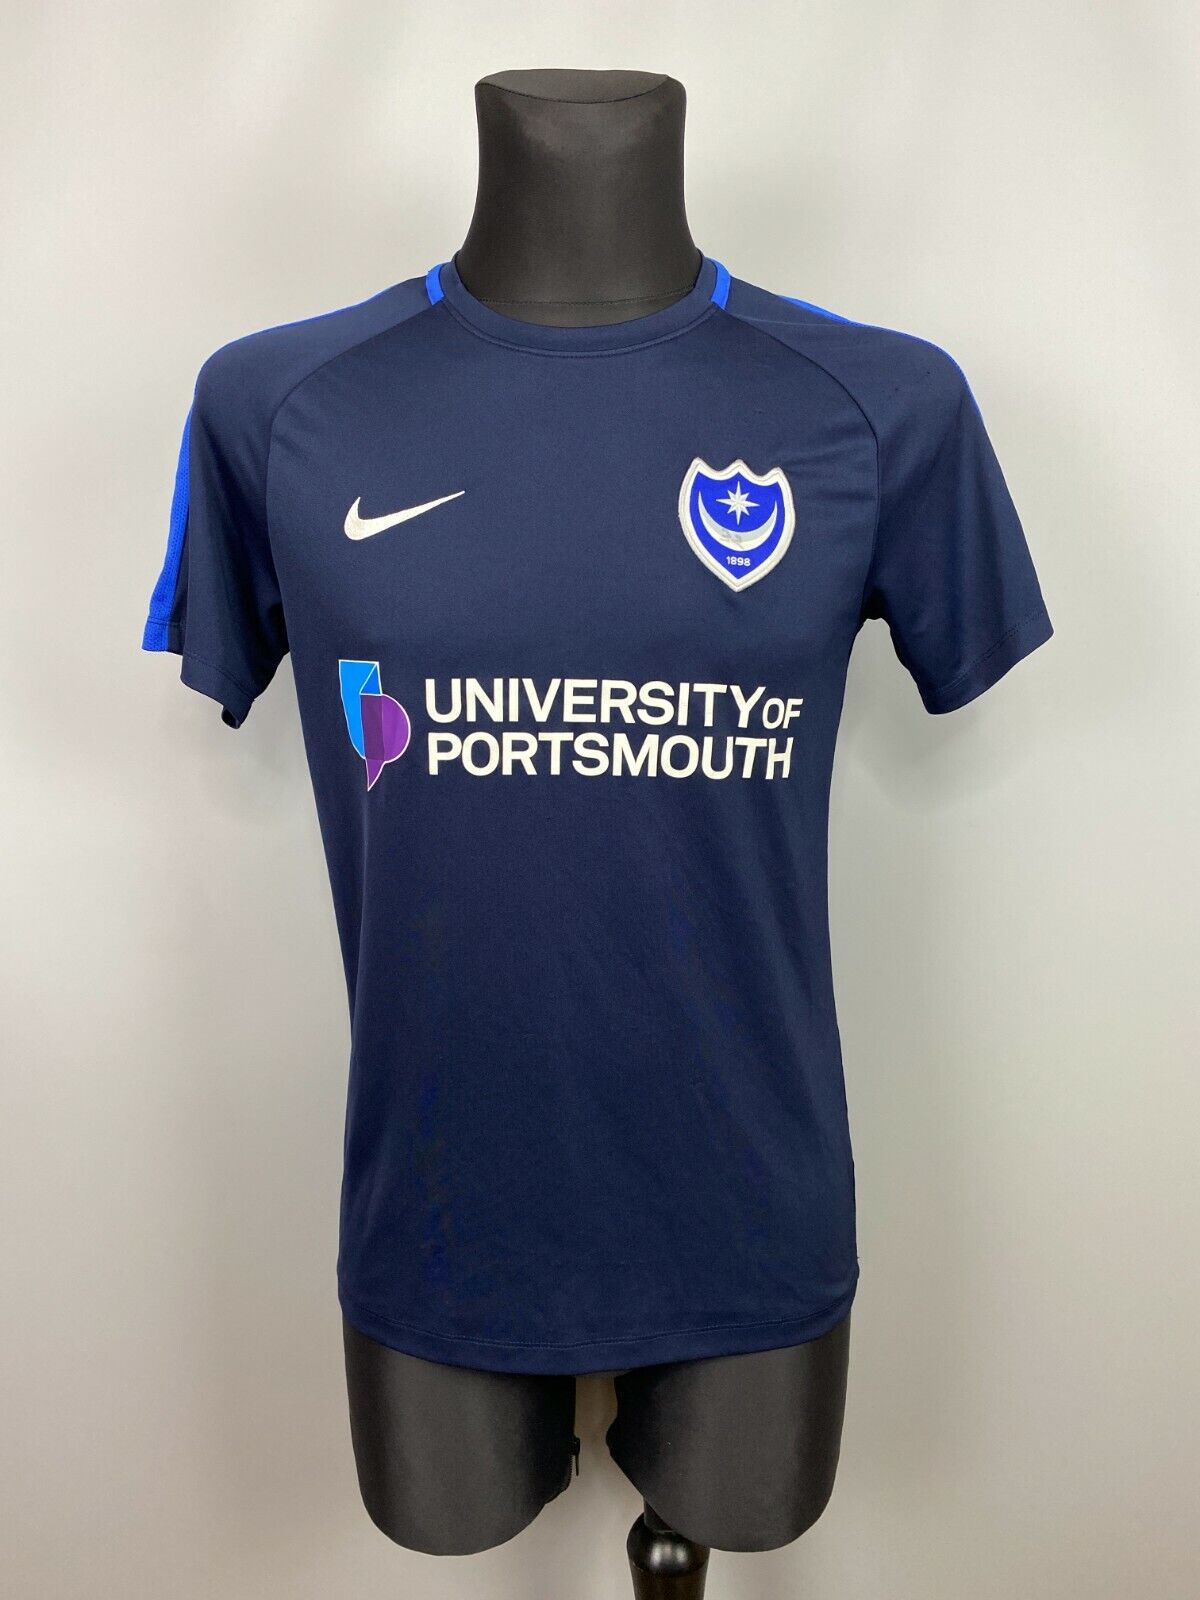 Air conditioner India Salesperson PORTSMOUTH 2018 2019 TRAINING SHIRT FOOTBALL SOCCER JERSEY NIKE 893693-451  M | eBay